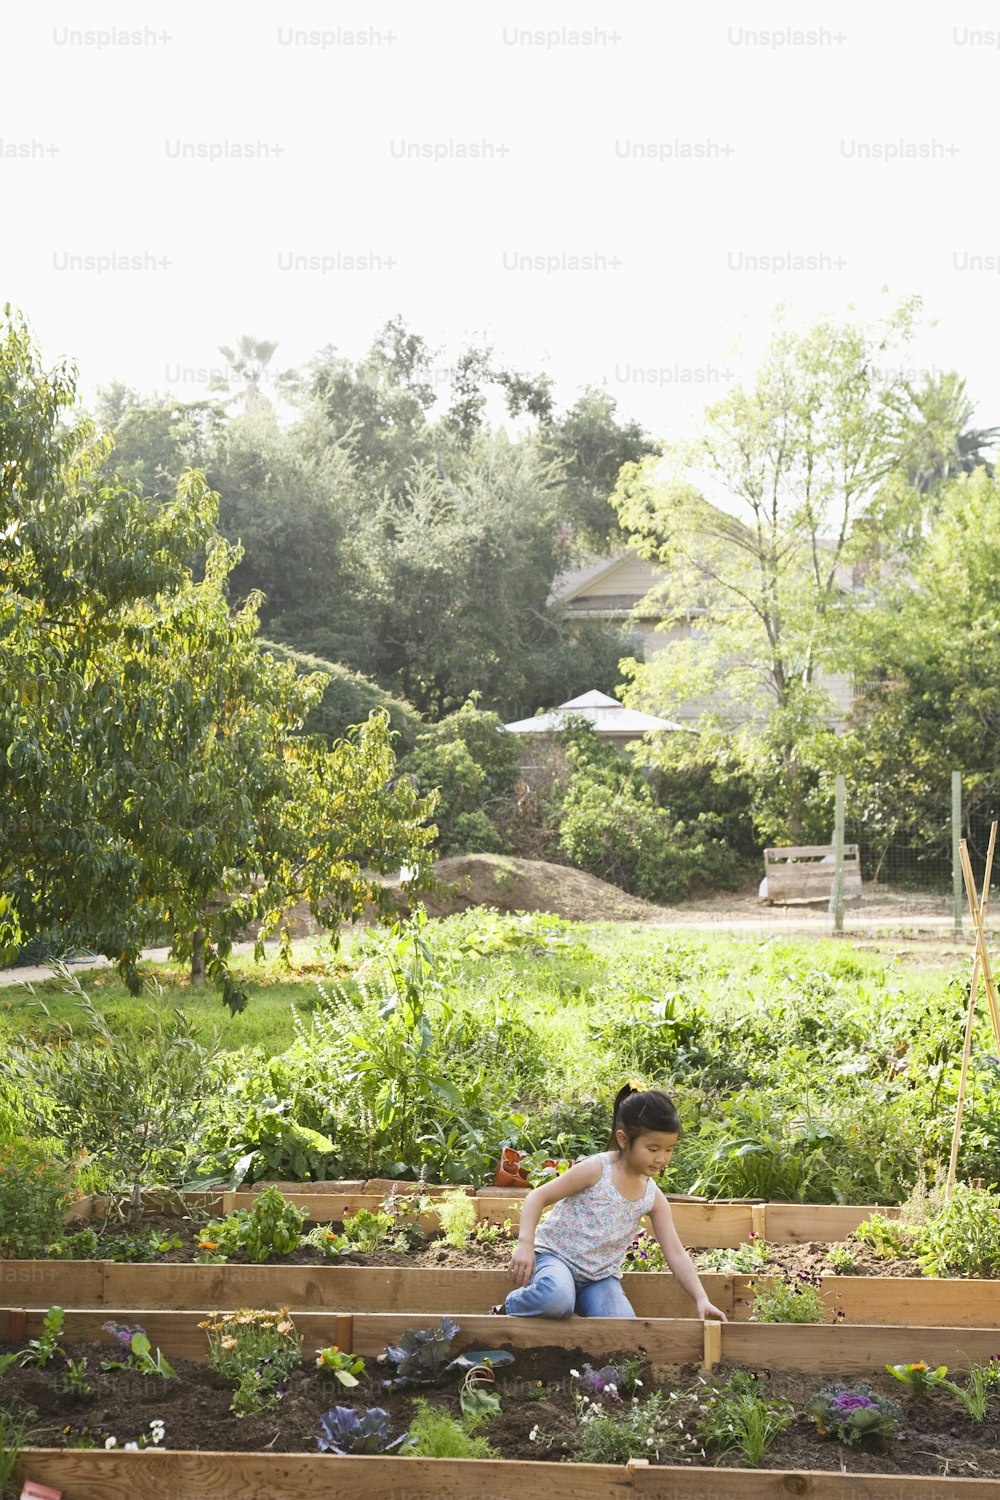 a woman kneeling down in a garden filled with lots of plants